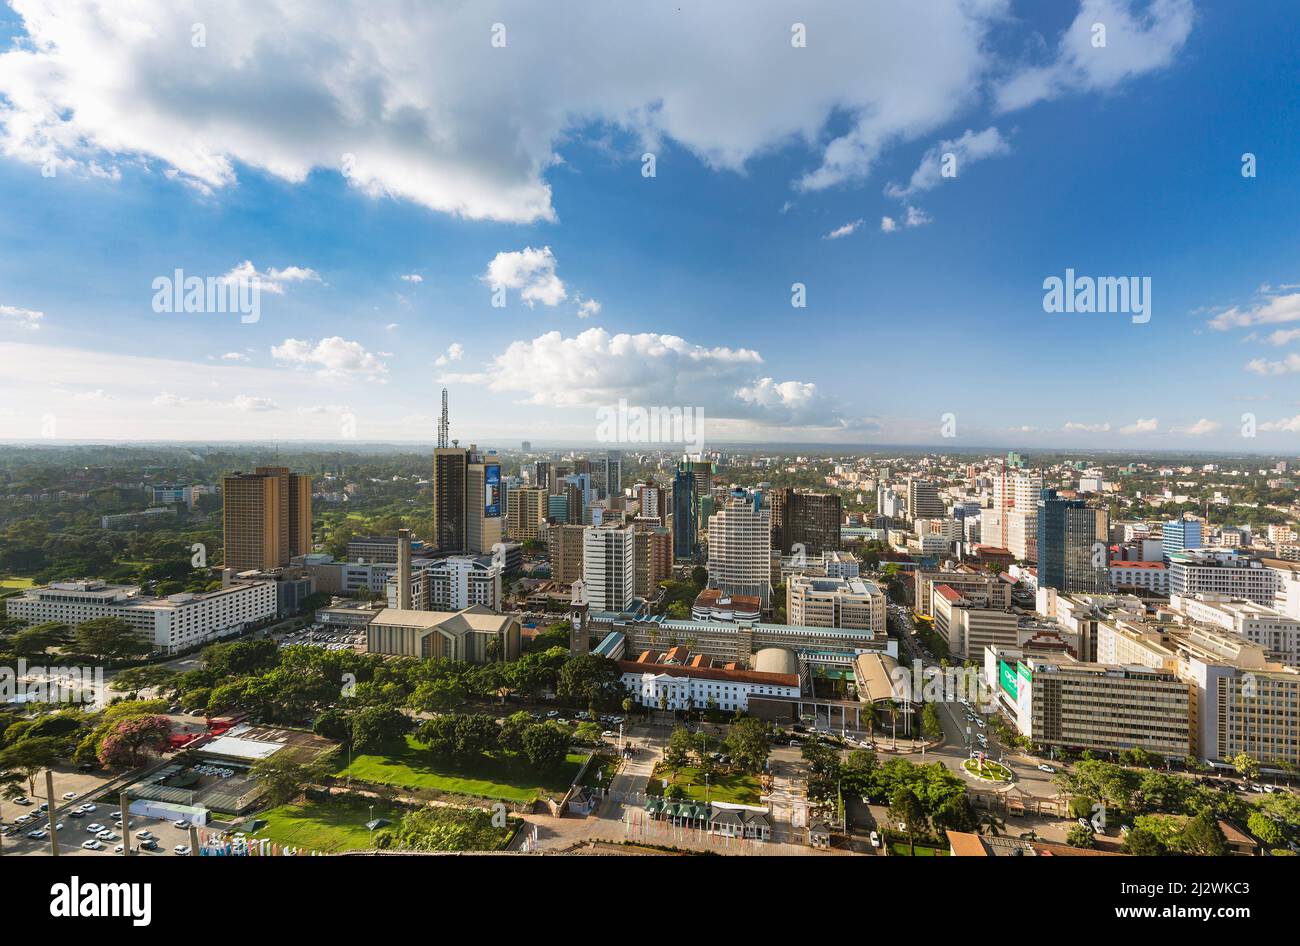 Nairobi, Kenya - December 23: View over the north-western part of the business district of Nairobi, Kenya, with the Teleposta Tower to the left and th Stock Photo